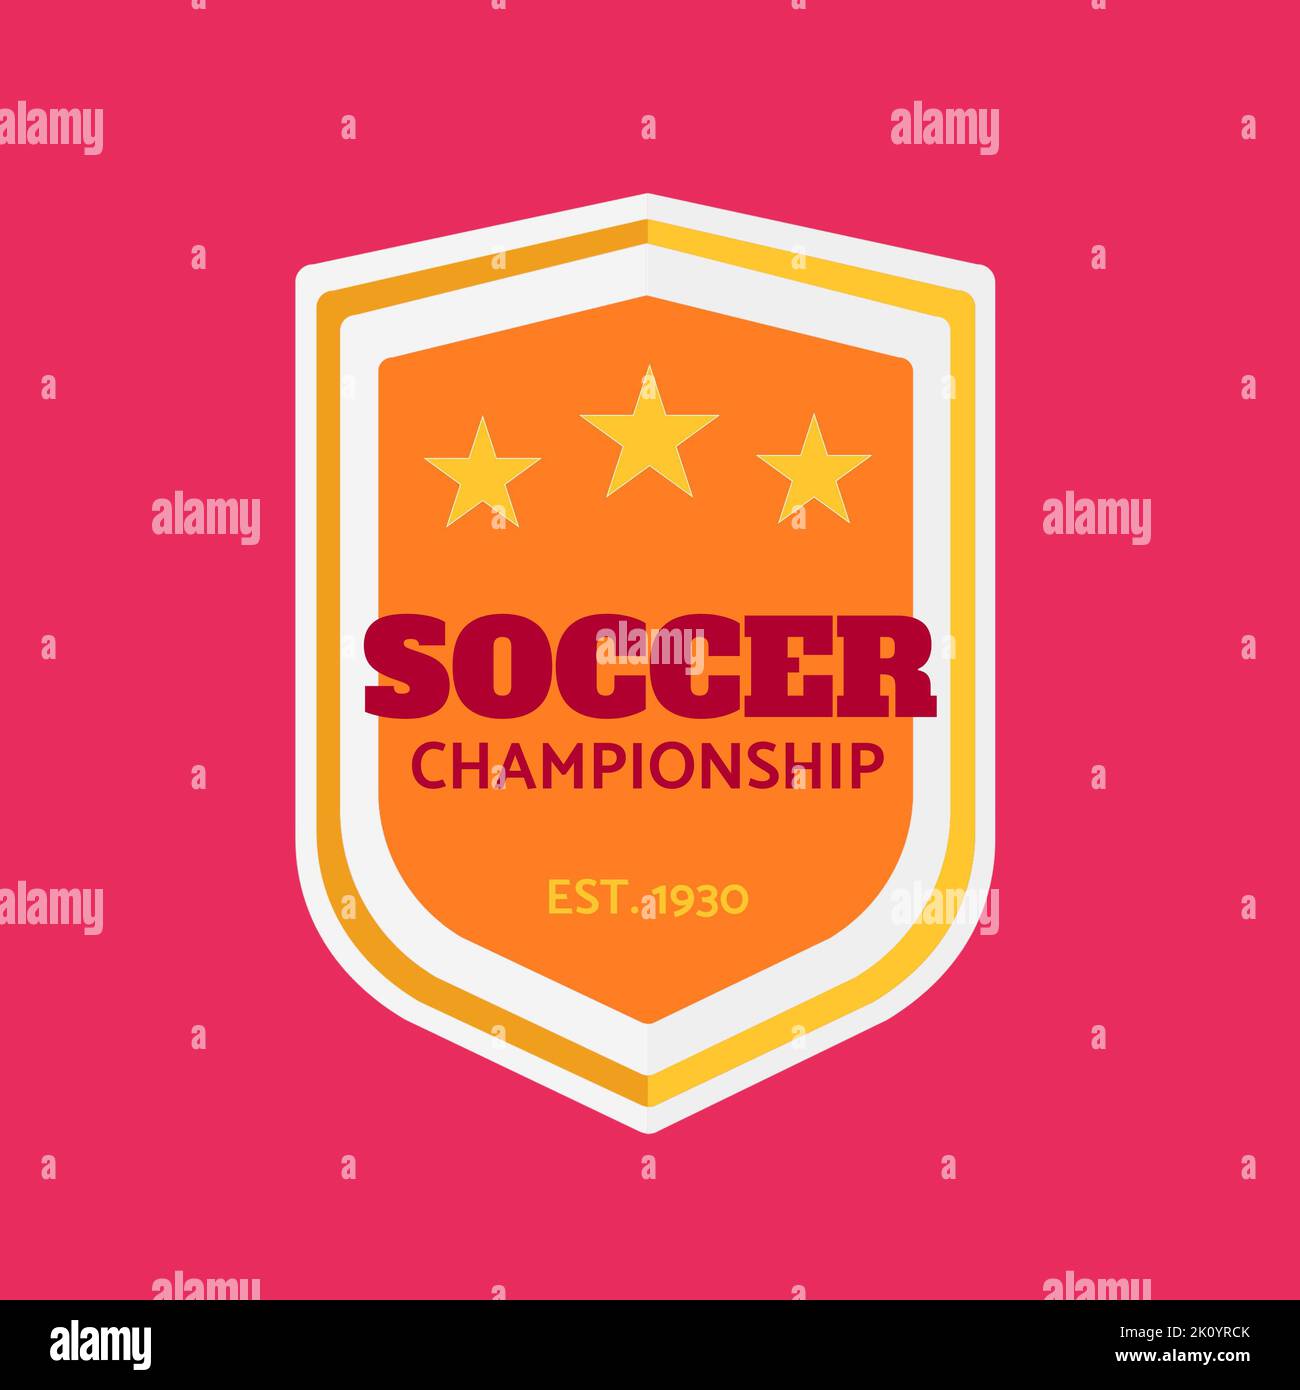 Composition of logo with soccer championship text on red background Stock Photo